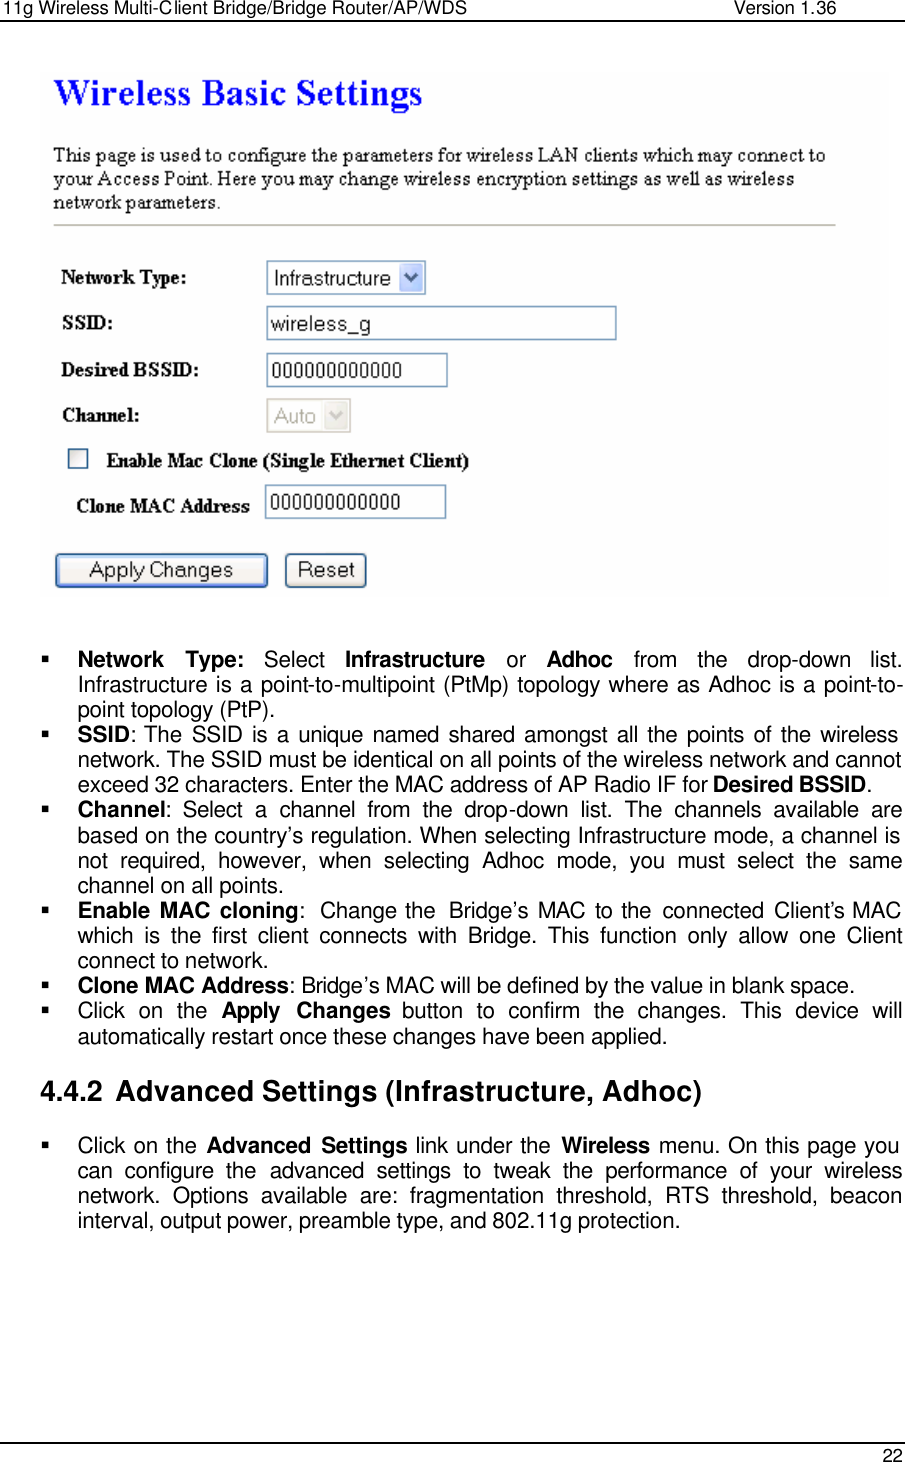 11g Wireless Multi-Client Bridge/Bridge Router/AP/WDS                                                   Version 1.36    22     § Network Type: Select  Infrastructure or Adhoc from the drop-down list. Infrastructure is a point-to-multipoint (PtMp) topology where as Adhoc is a point-to-point topology (PtP). § SSID: The SSID is a unique named shared amongst all the points of the wireless network. The SSID must be identical on all points of the wireless network and cannot exceed 32 characters. Enter the MAC address of AP Radio IF for Desired BSSID. § Channel: Select a channel from the drop-down list. The channels available are based on the country’s regulation. When selecting Infrastructure mode, a channel is not required, however, when selecting Adhoc mode, you must select the same channel on all points.  § Enable MAC cloning:  Change the  Bridge’s MAC to the connected Client’s MAC which is the first client connects with Bridge. This function only allow one Client connect to network. § Clone MAC Address: Bridge’s MAC will be defined by the value in blank space. § Click on the Apply Changes button to confirm the changes. This device will automatically restart once these changes have been applied.   4.4.2 Advanced Settings (Infrastructure, Adhoc) § Click on the Advanced Settings link under the Wireless menu. On this page you can configure the advanced settings to tweak the performance of your wireless network. Options available are: fragmentation threshold, RTS threshold, beacon interval, output power, preamble type, and 802.11g protection.    